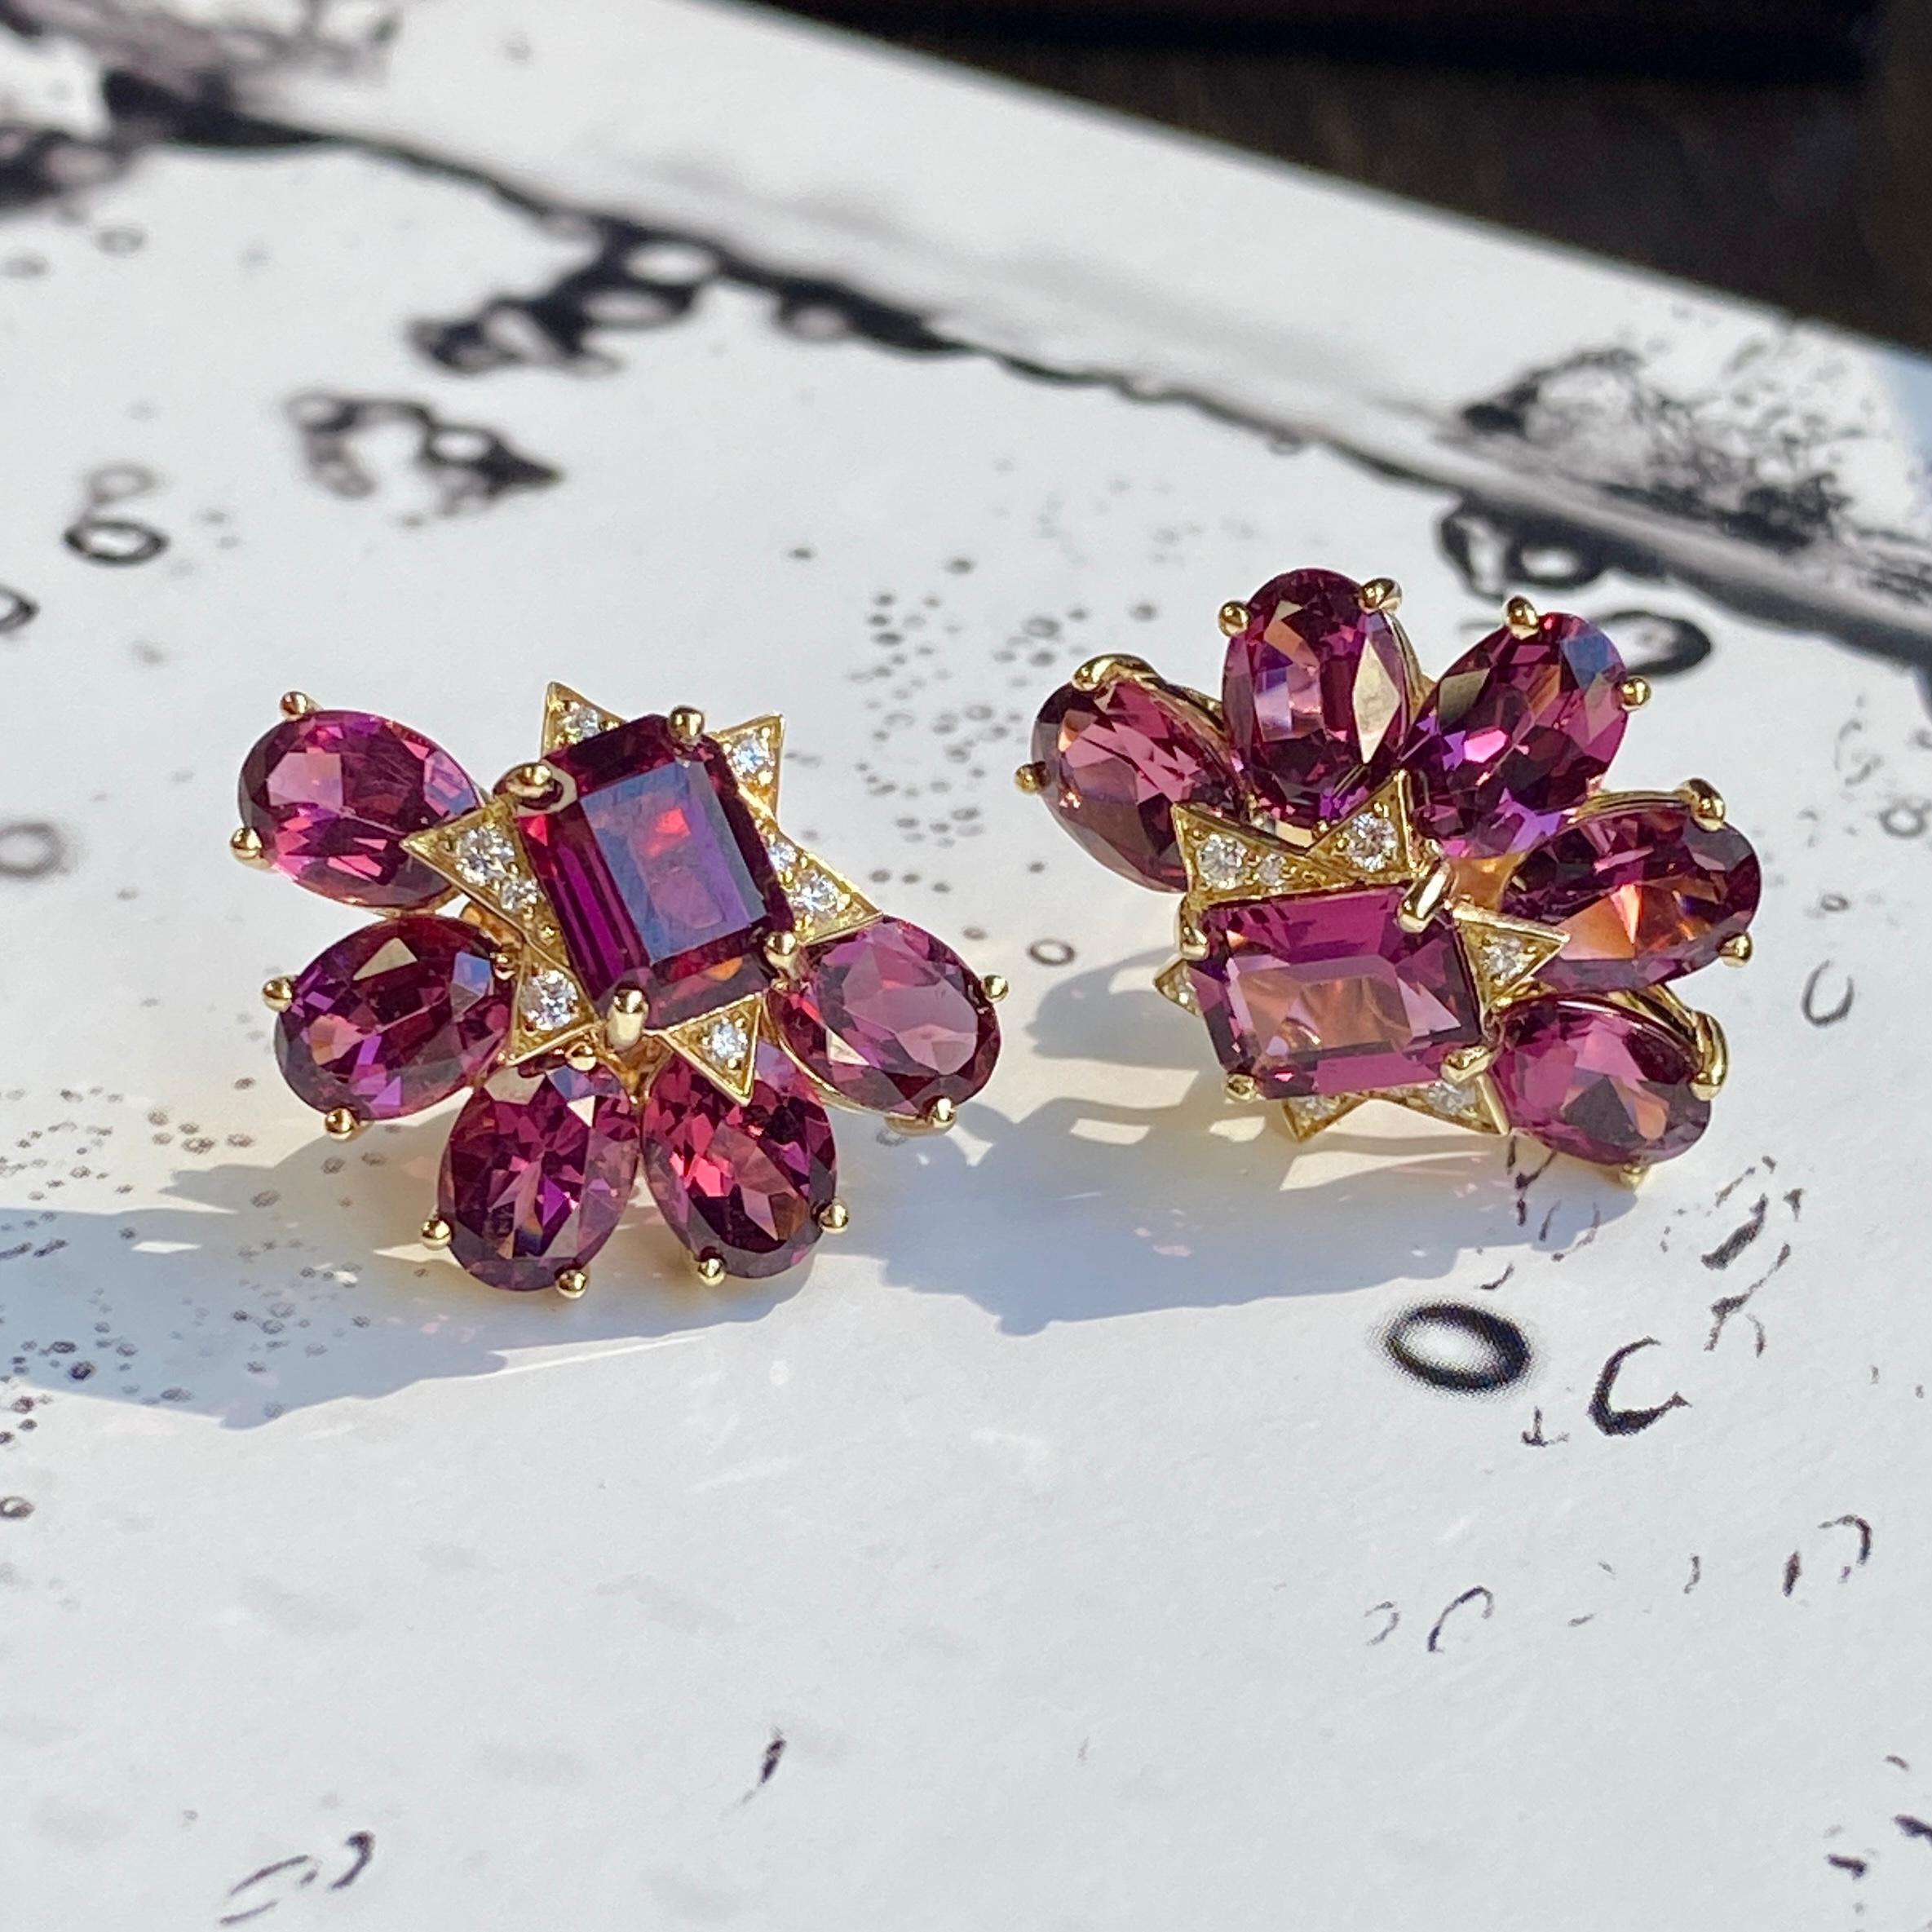 Contemporary Goshwara Faceted Oval and Emerald Cut Garnet Stud with Diamonds Earrings